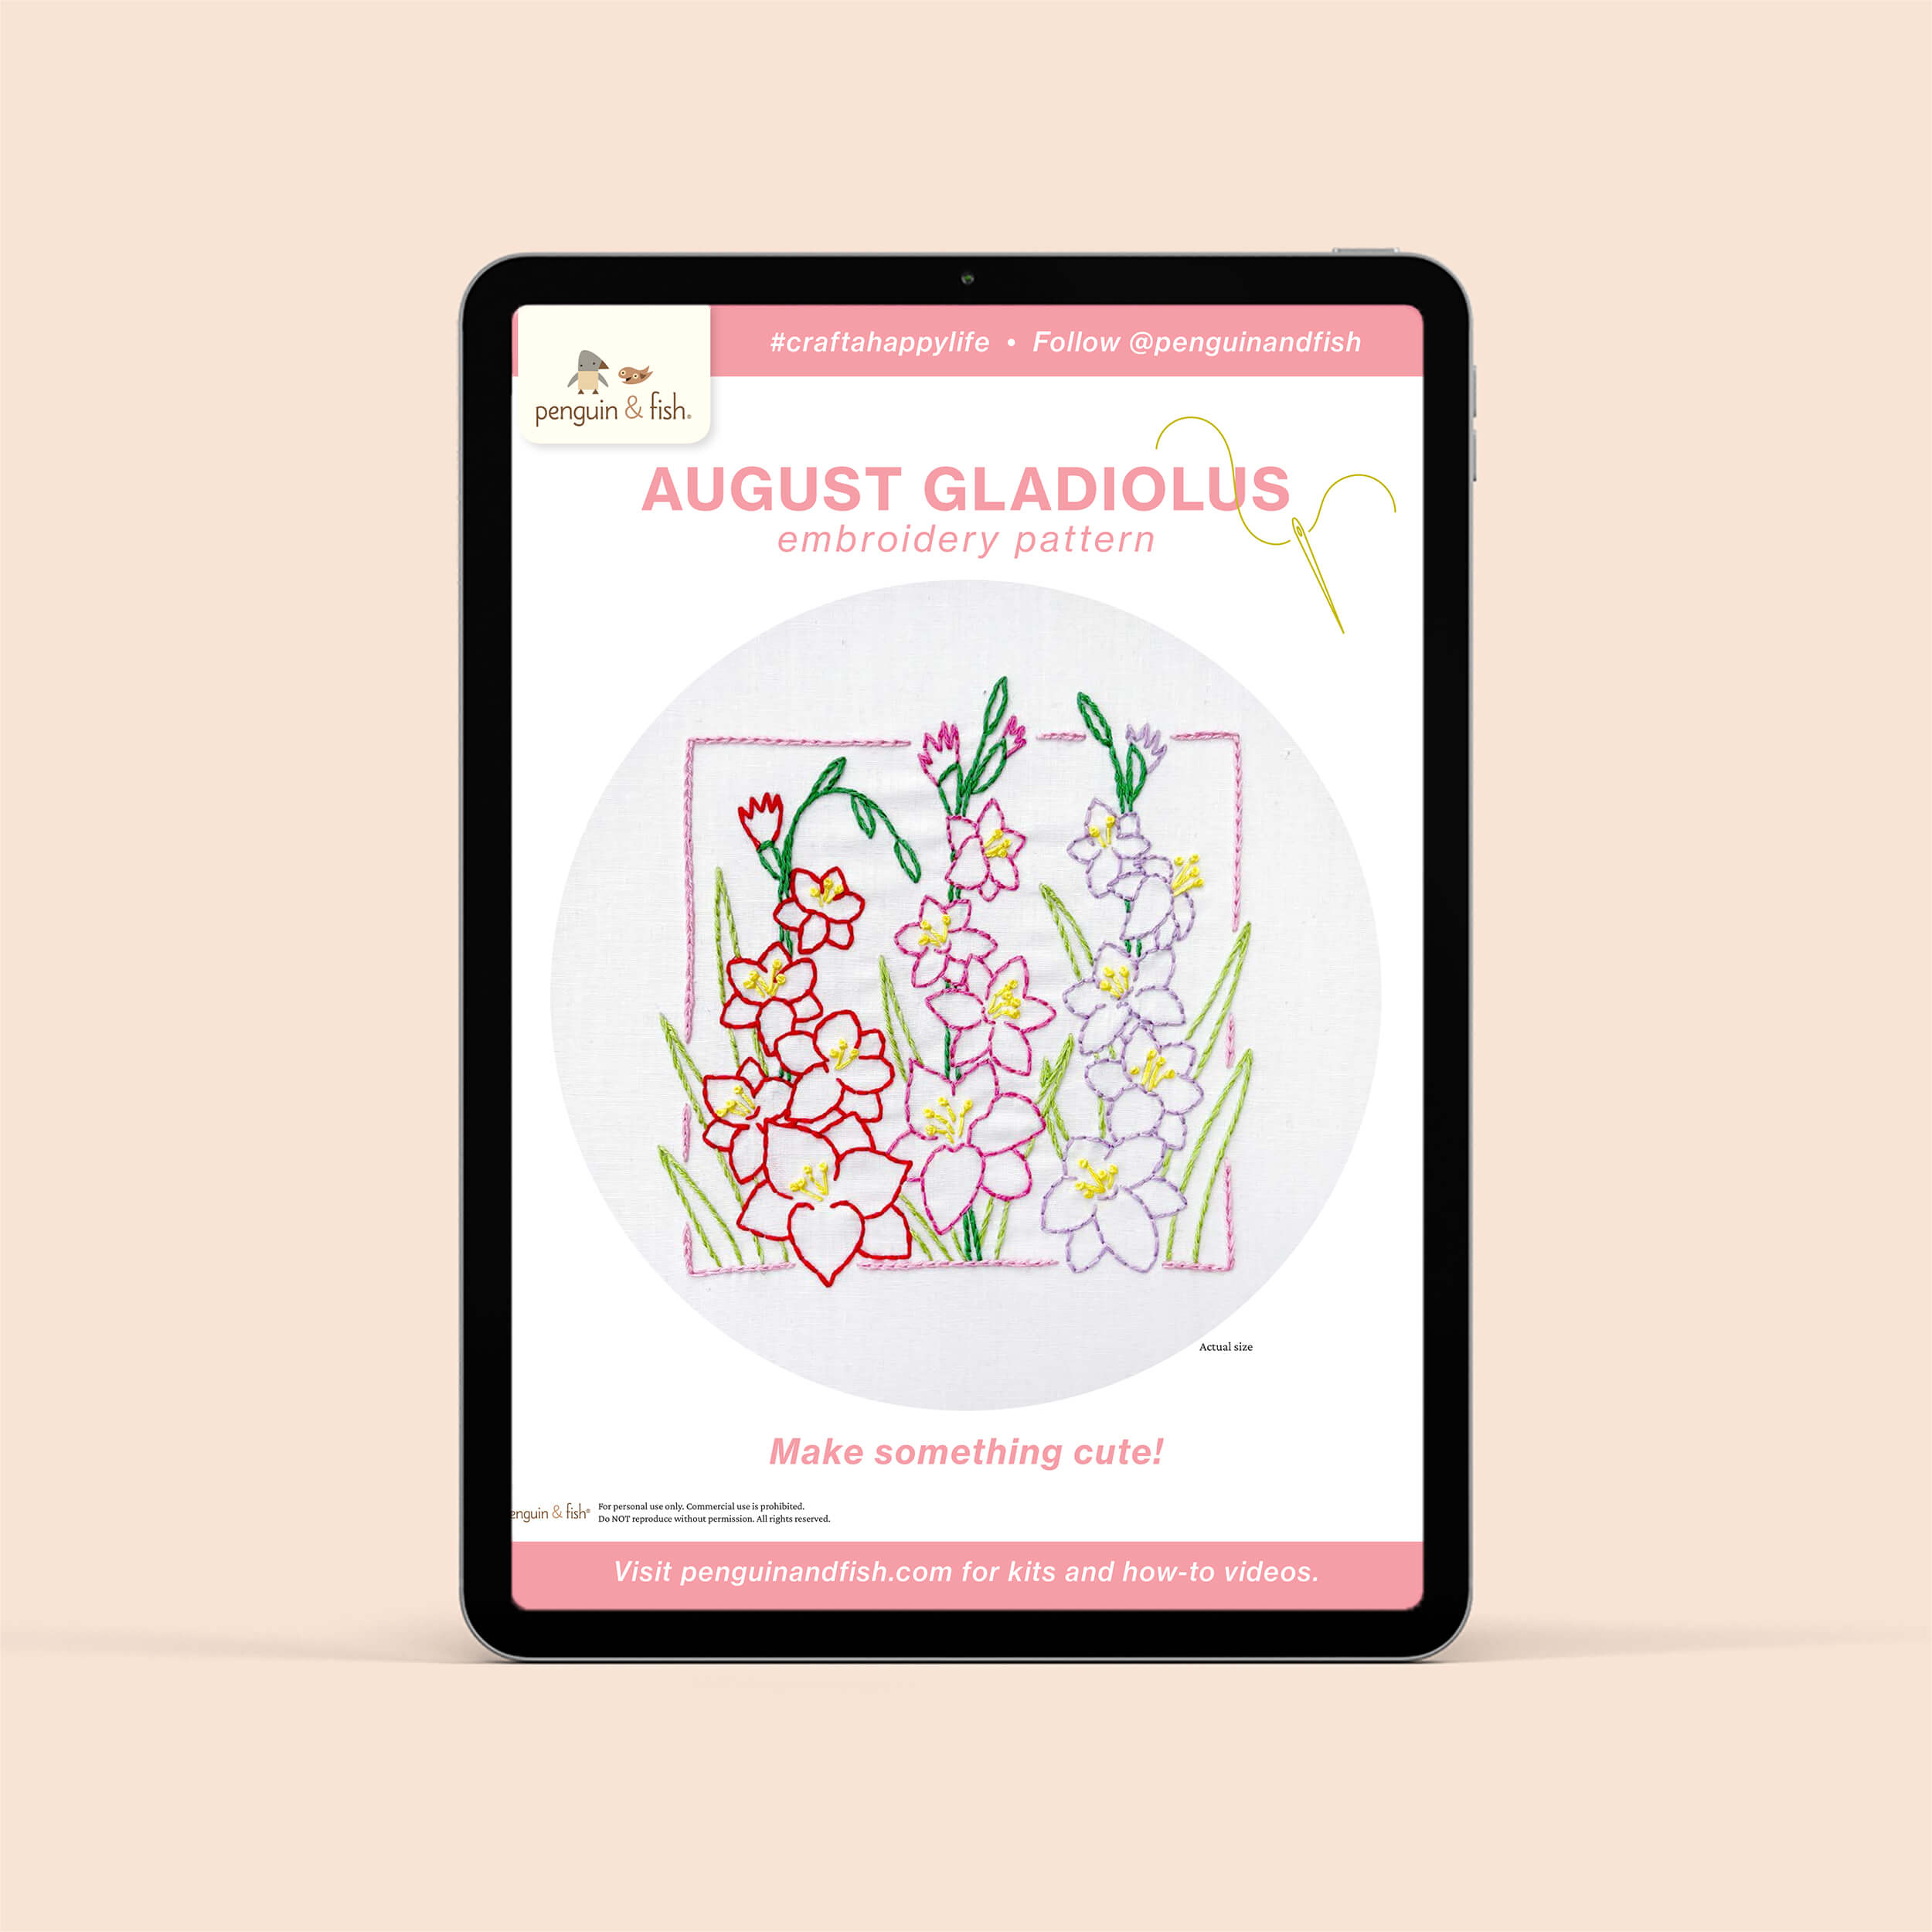 August Gladiolus PDF embroidery pattern shown on a tablet